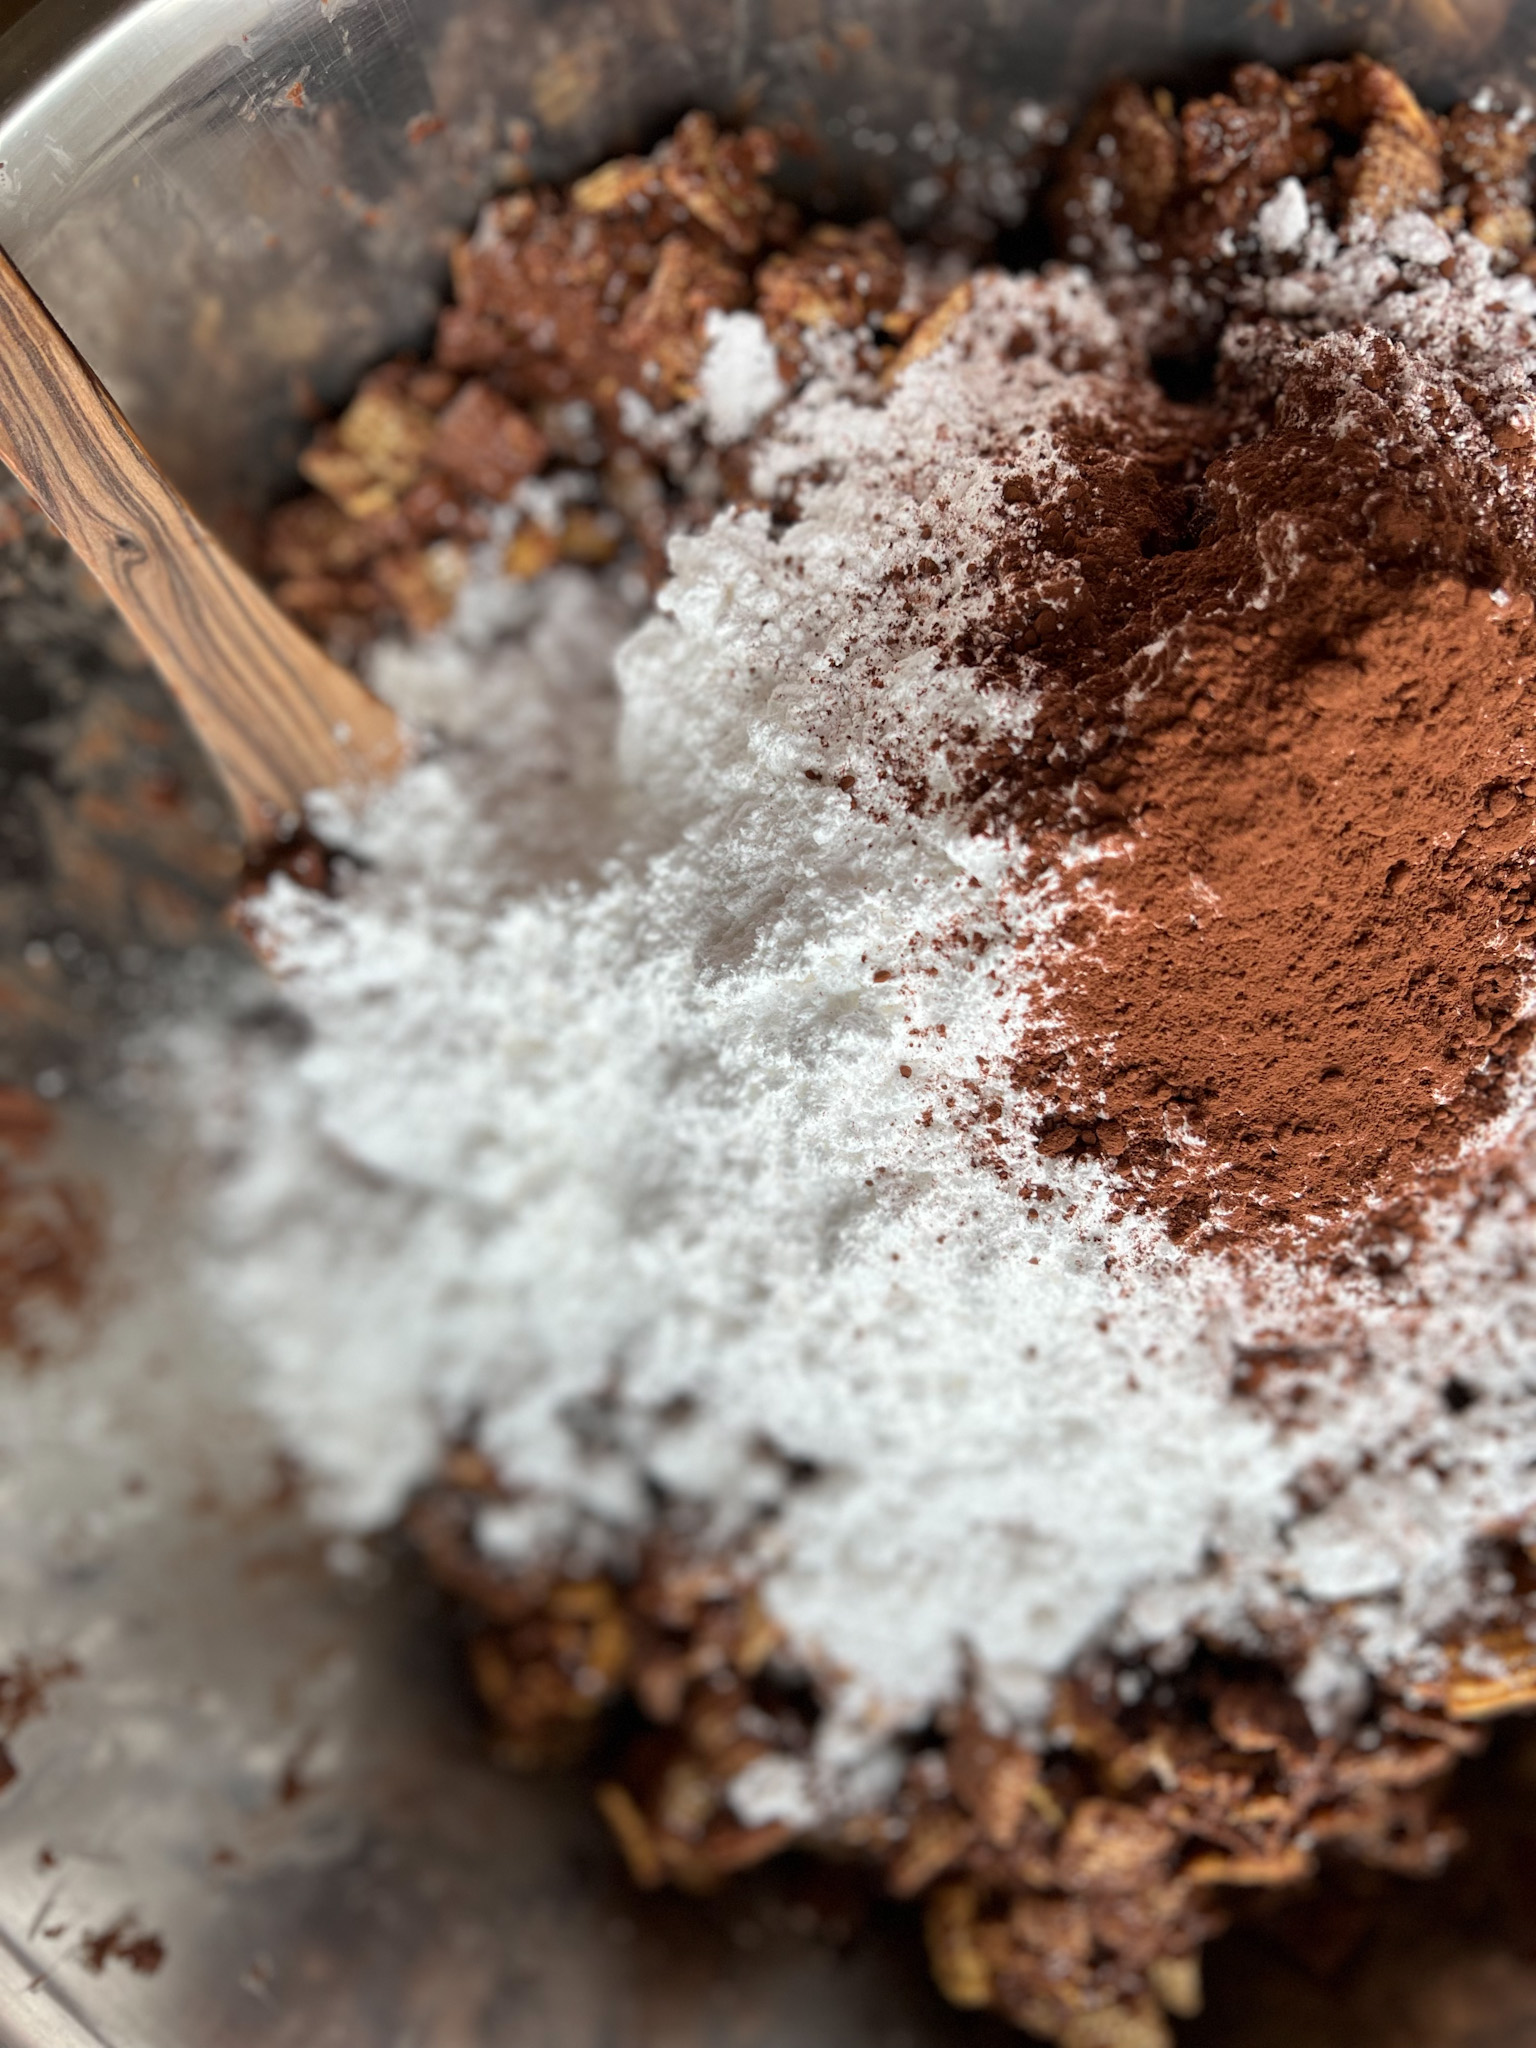 powder sugar and cocoa in puppy chow